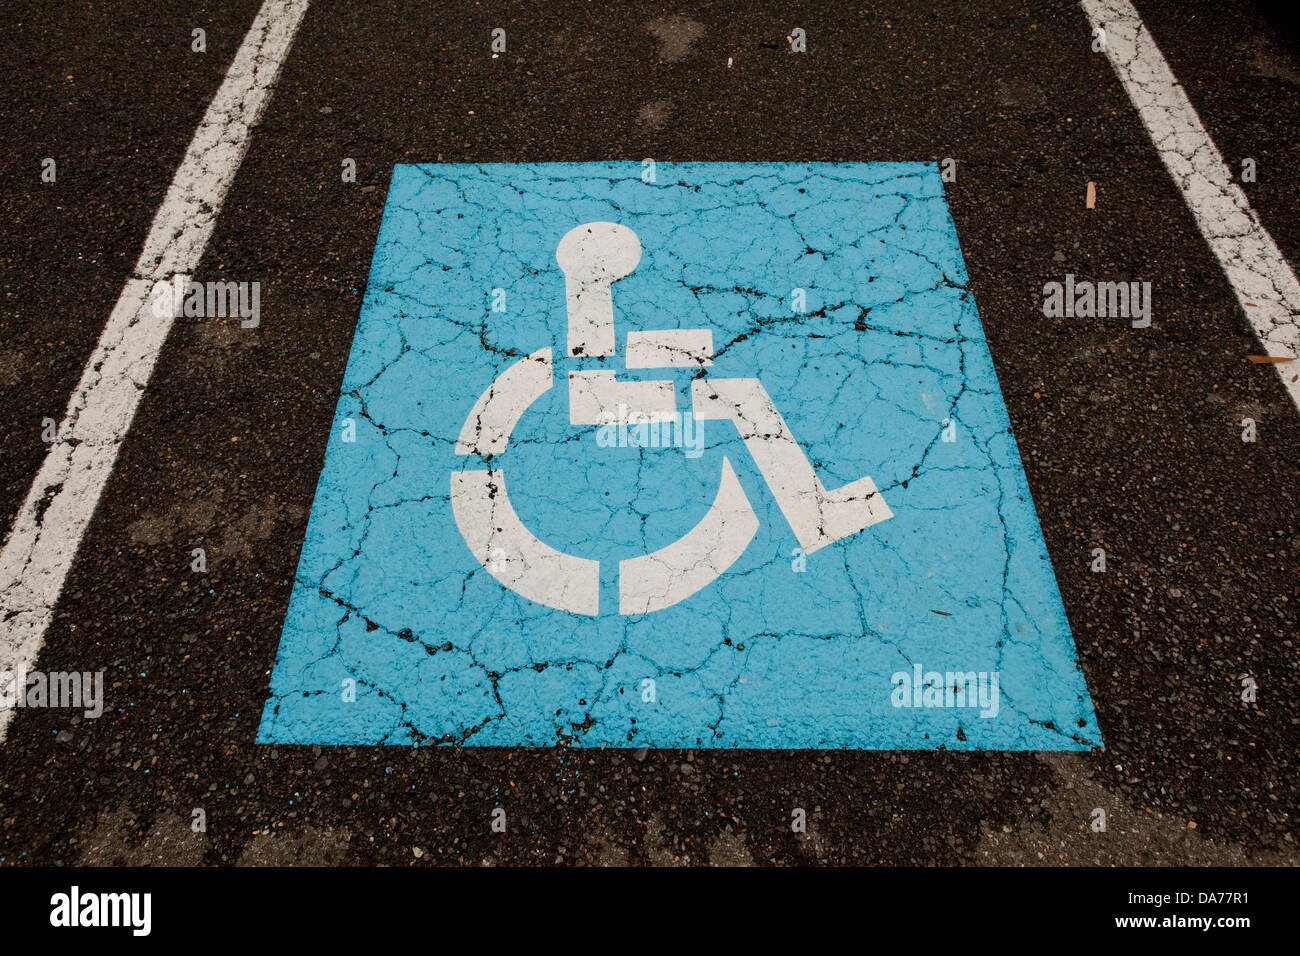 Disabled parking space sign Stock Photo